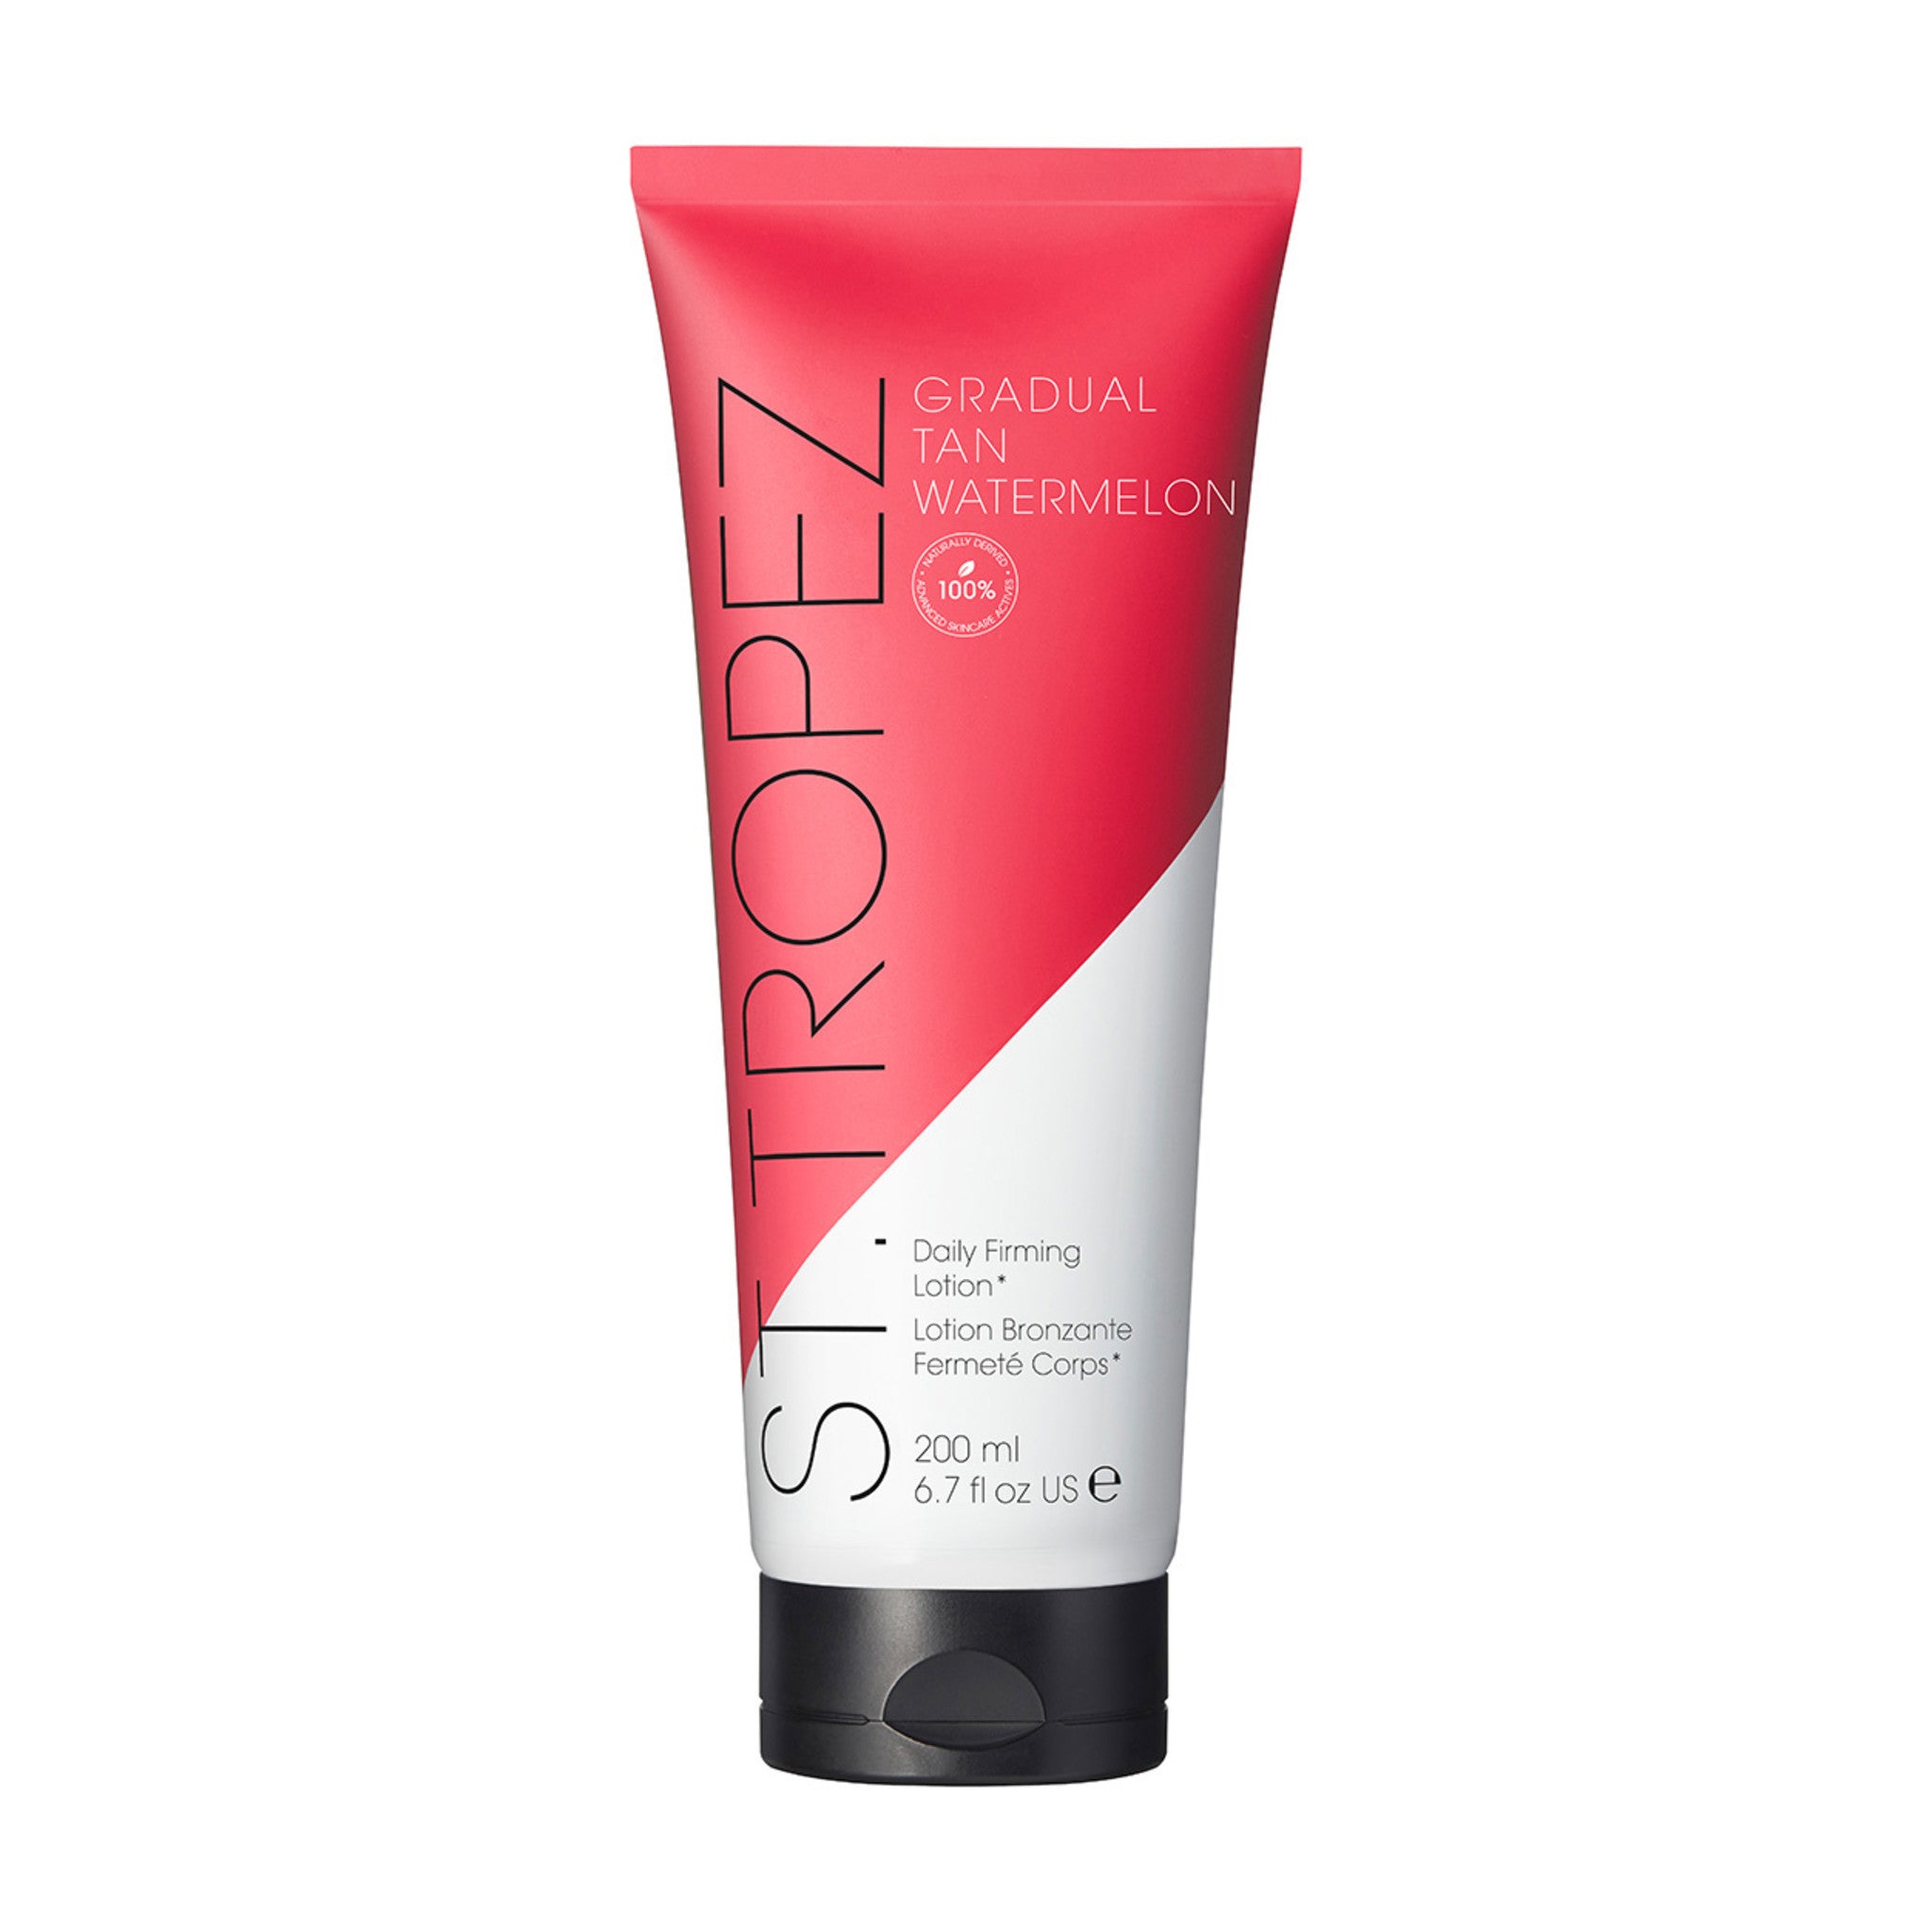 St. Tropez Gradual Tan Classic Daily Firming Lotion Color/Shade variant: Watermelon main image.